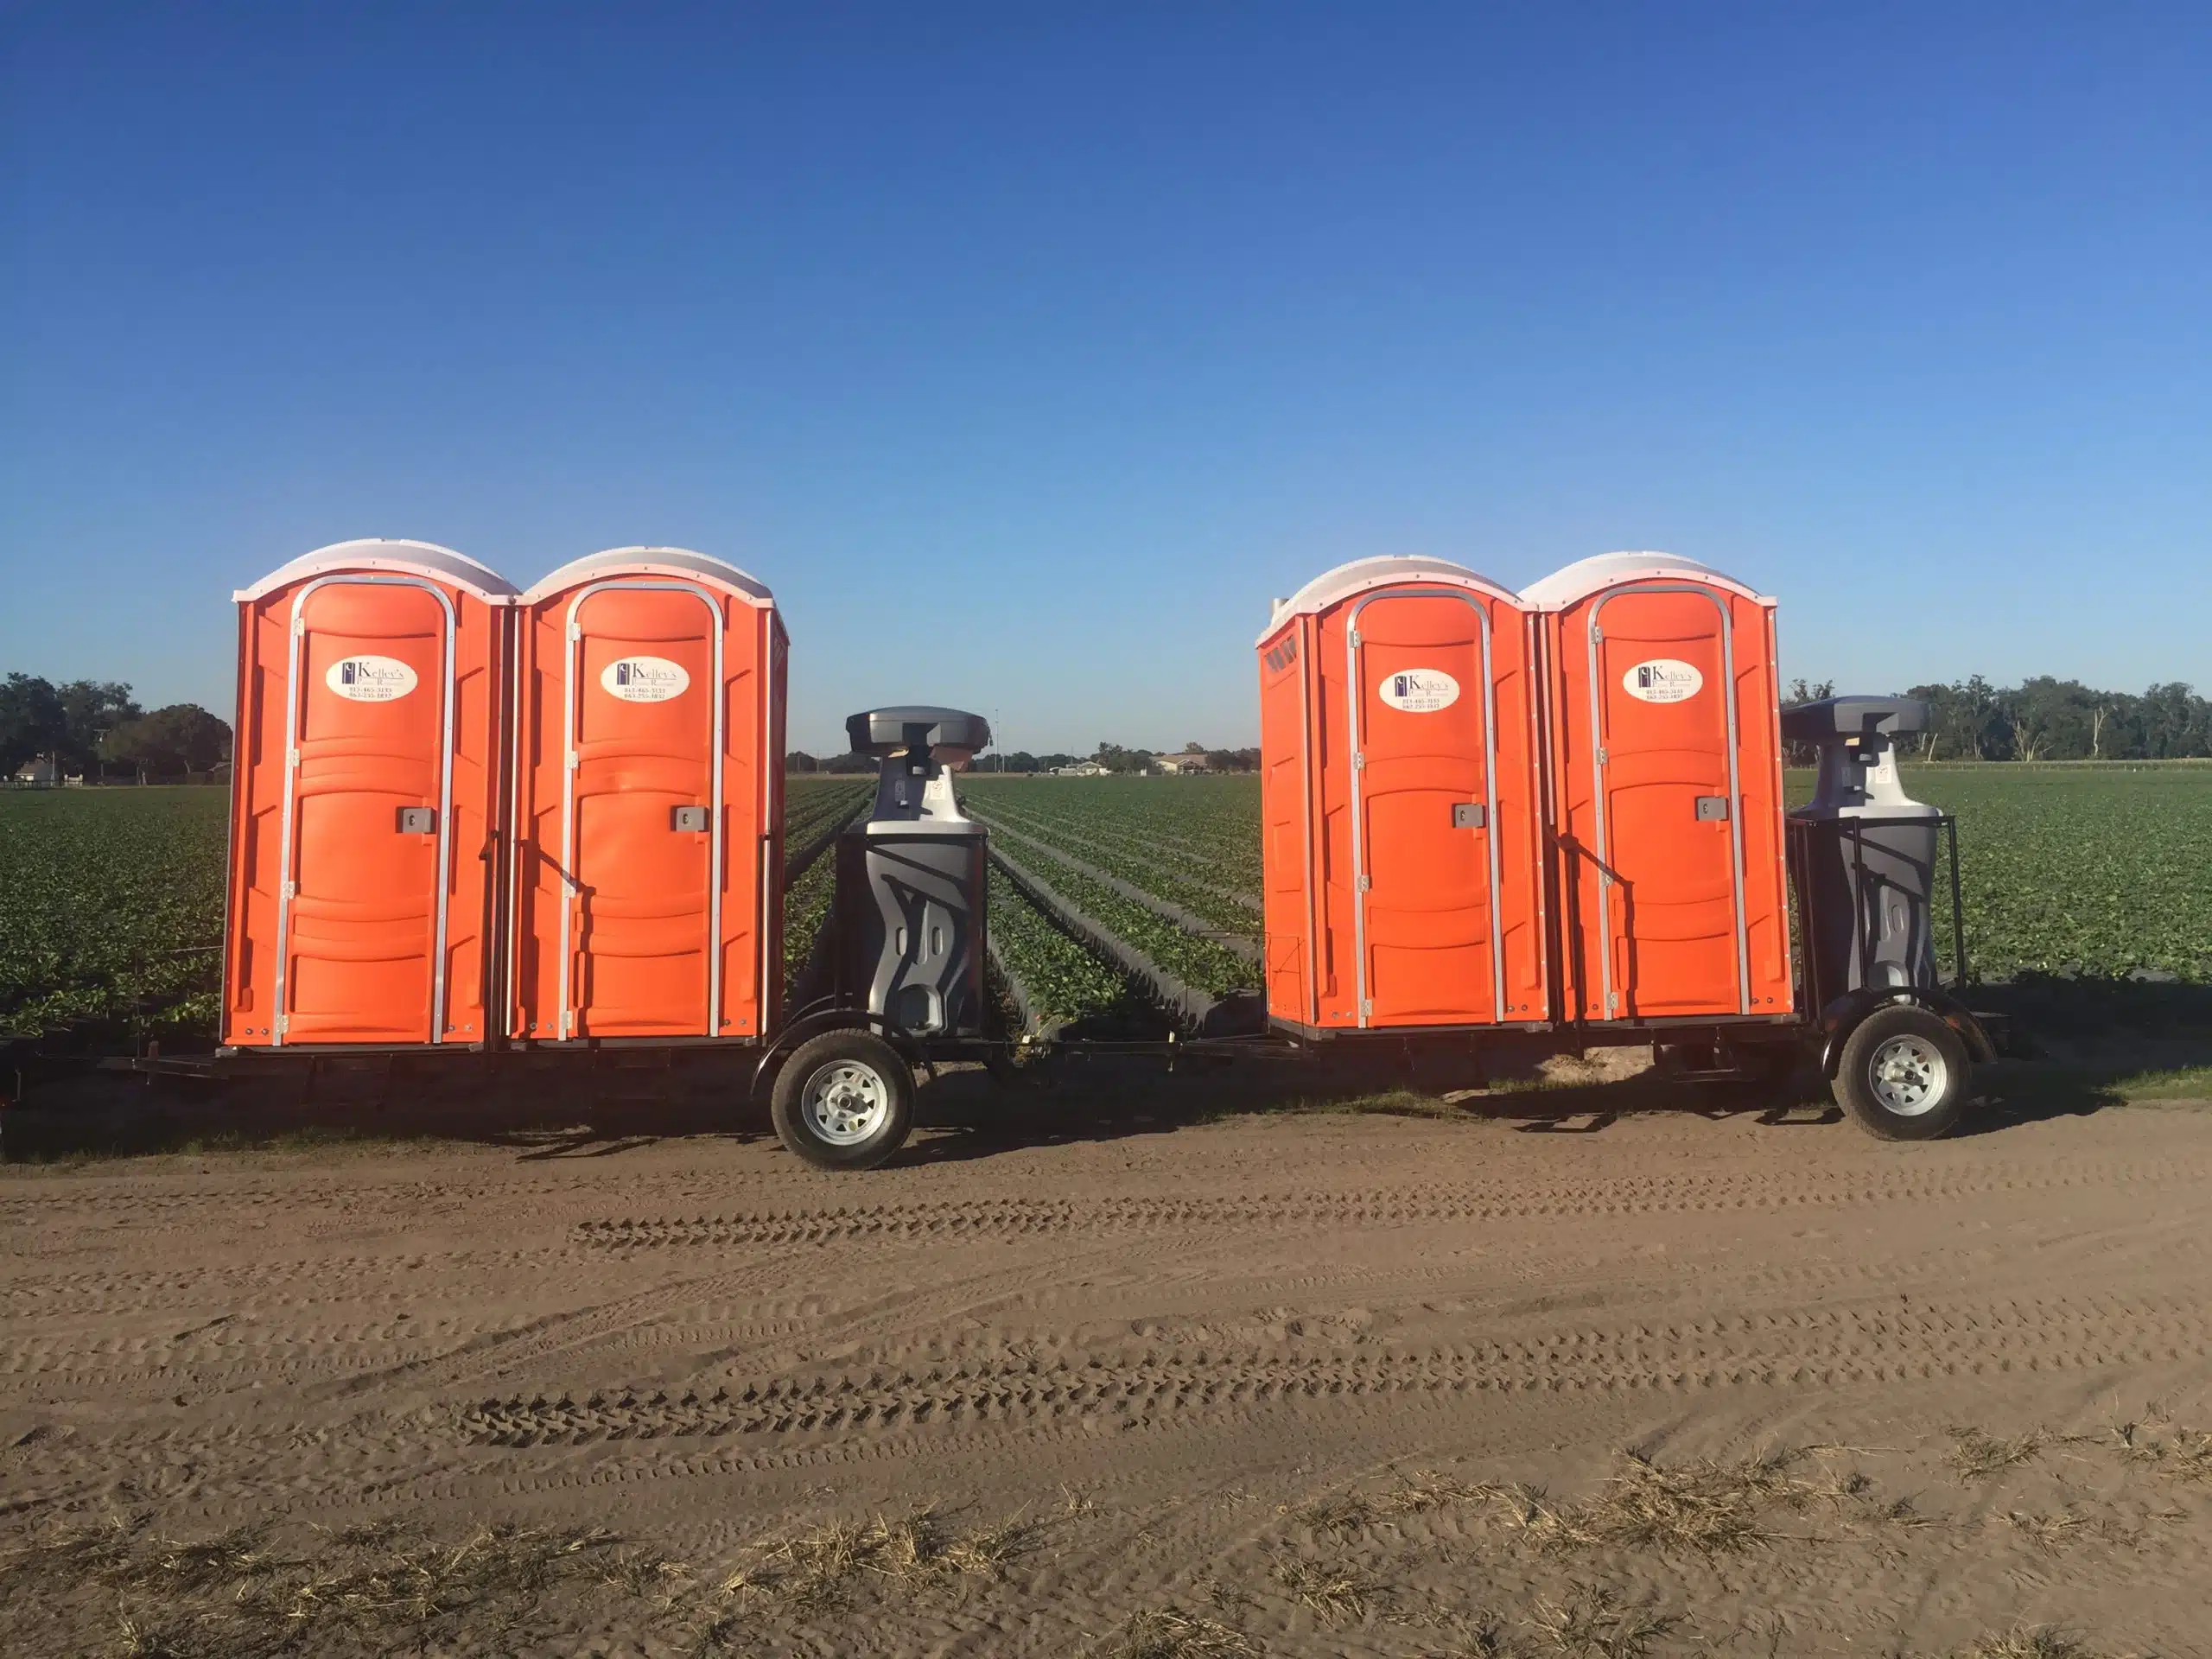 a row of orange portable toilets in a park.